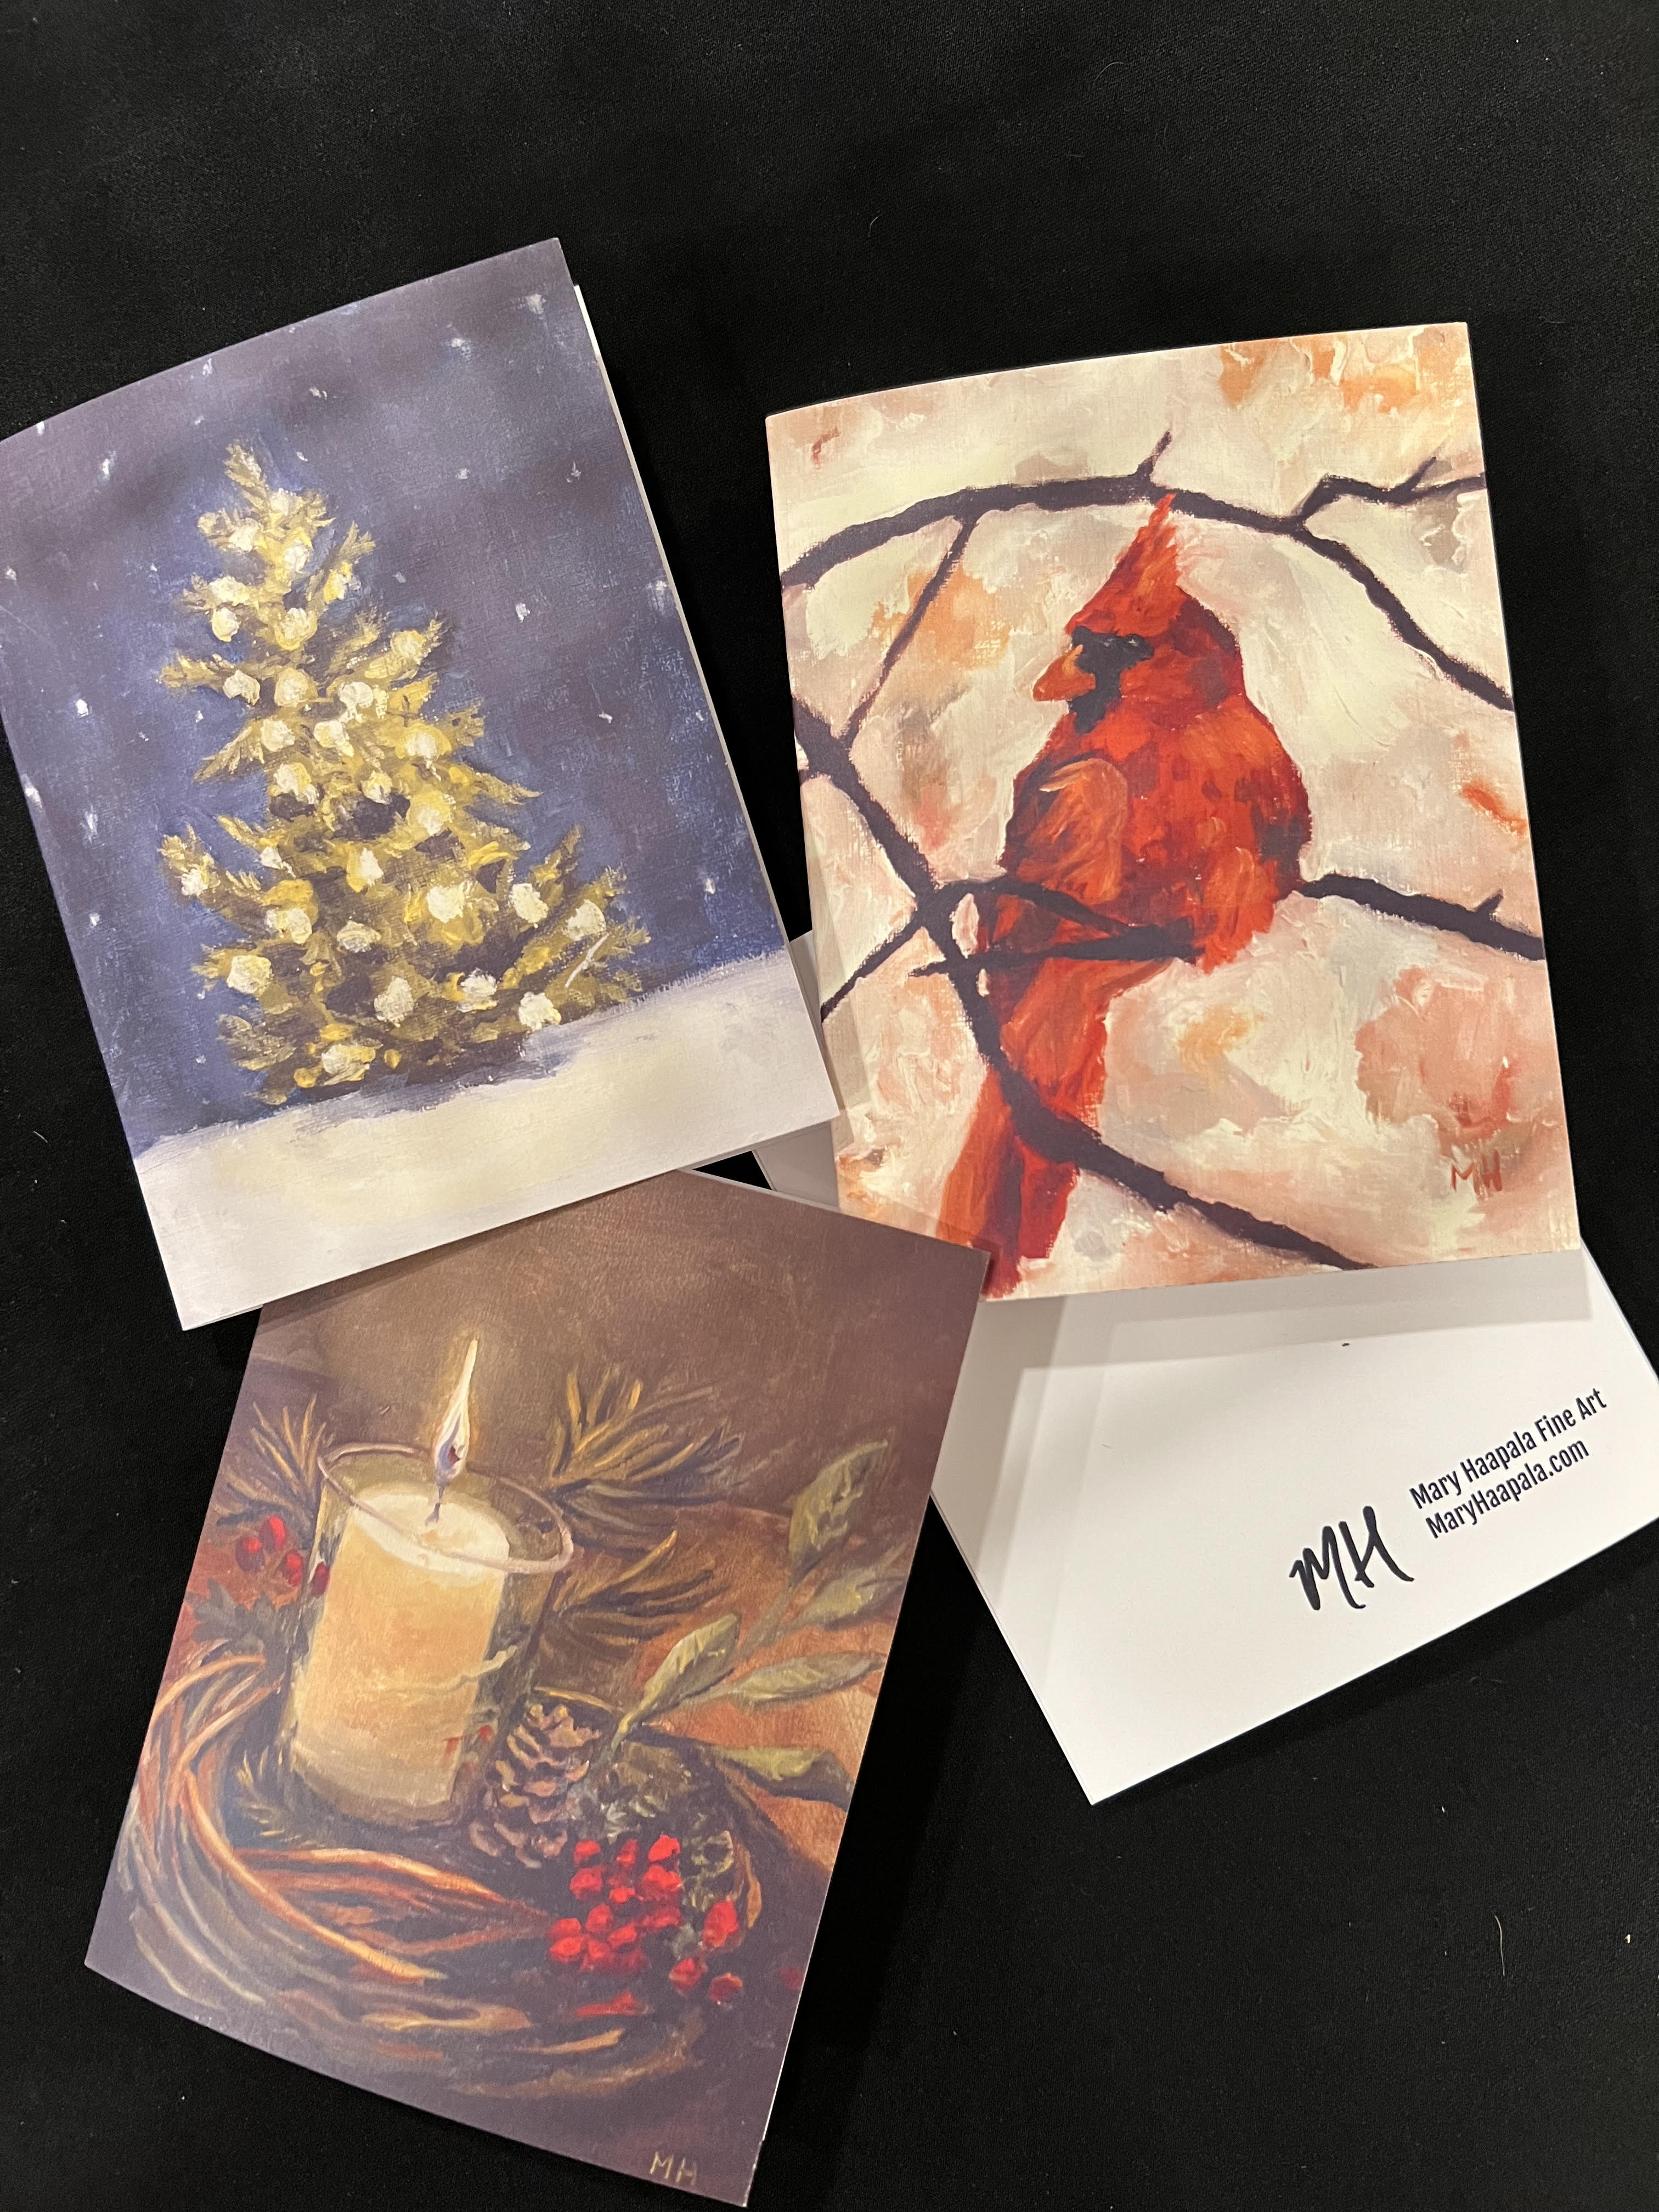 set of 3 greeting cards by mary haapala laying on a table. Cards portray three different designs: christmas tree with lights on a blue background. red cardinal in branches and a lit candle in a twig wreath with red berries and greenery.